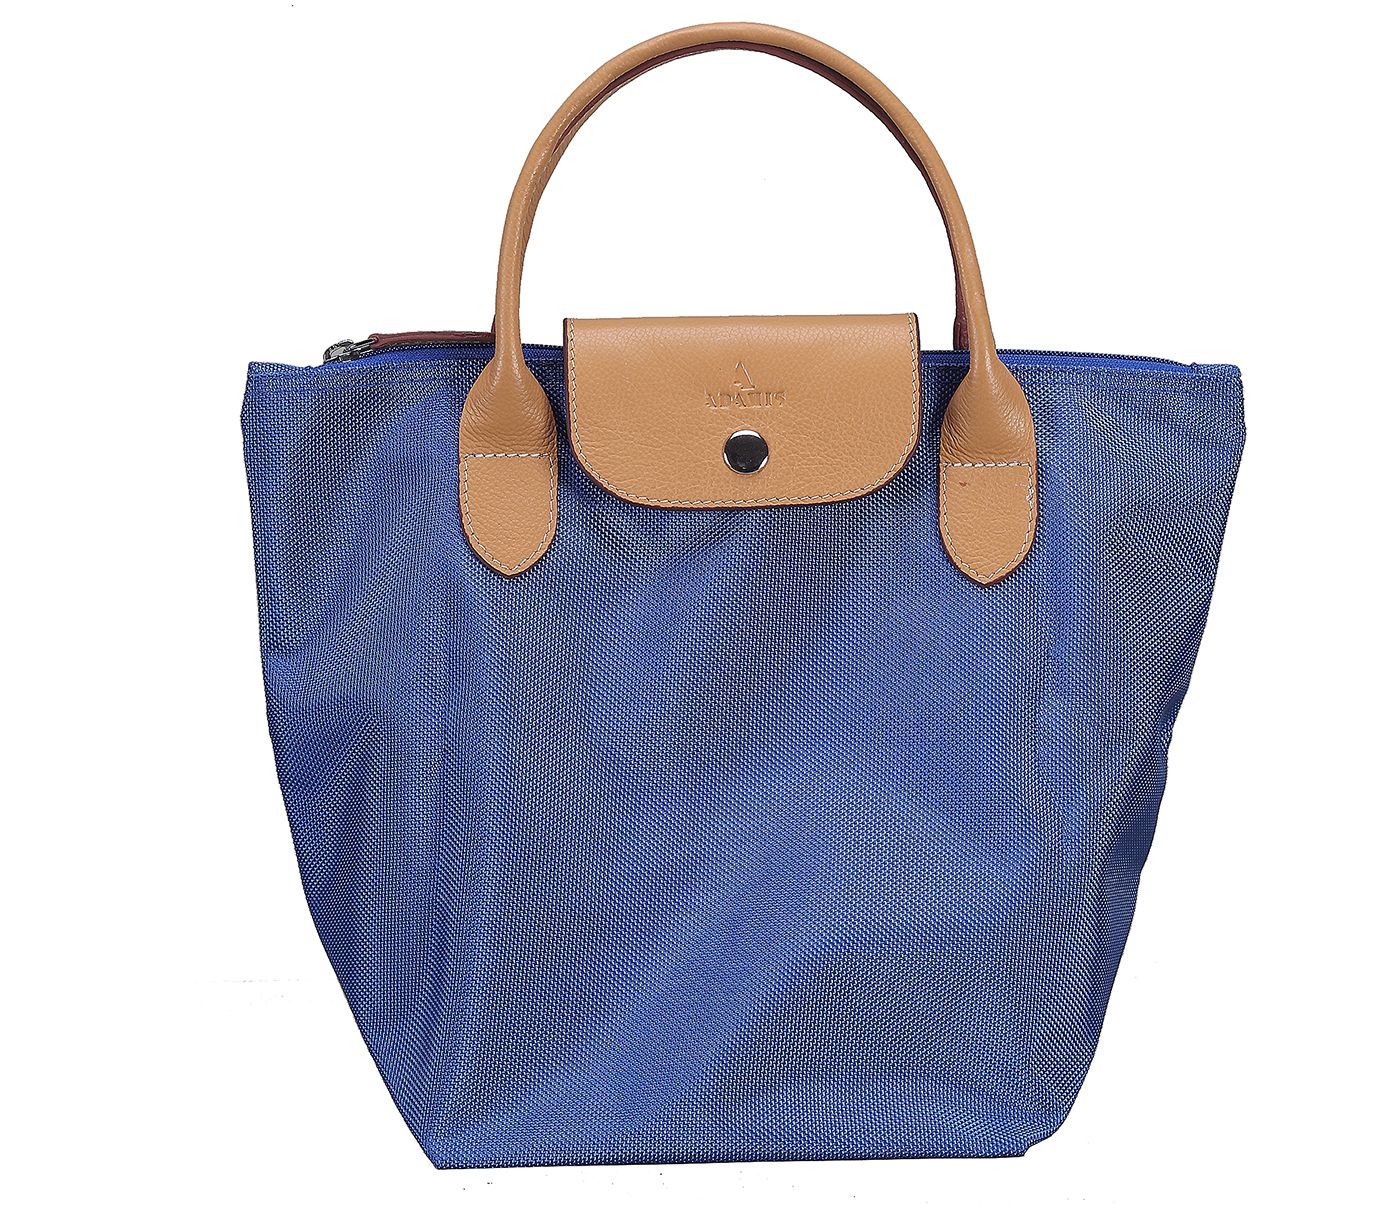 B690-Azul-Folding Tote in Tetron Material with Genuine Leather trimmings - Blue